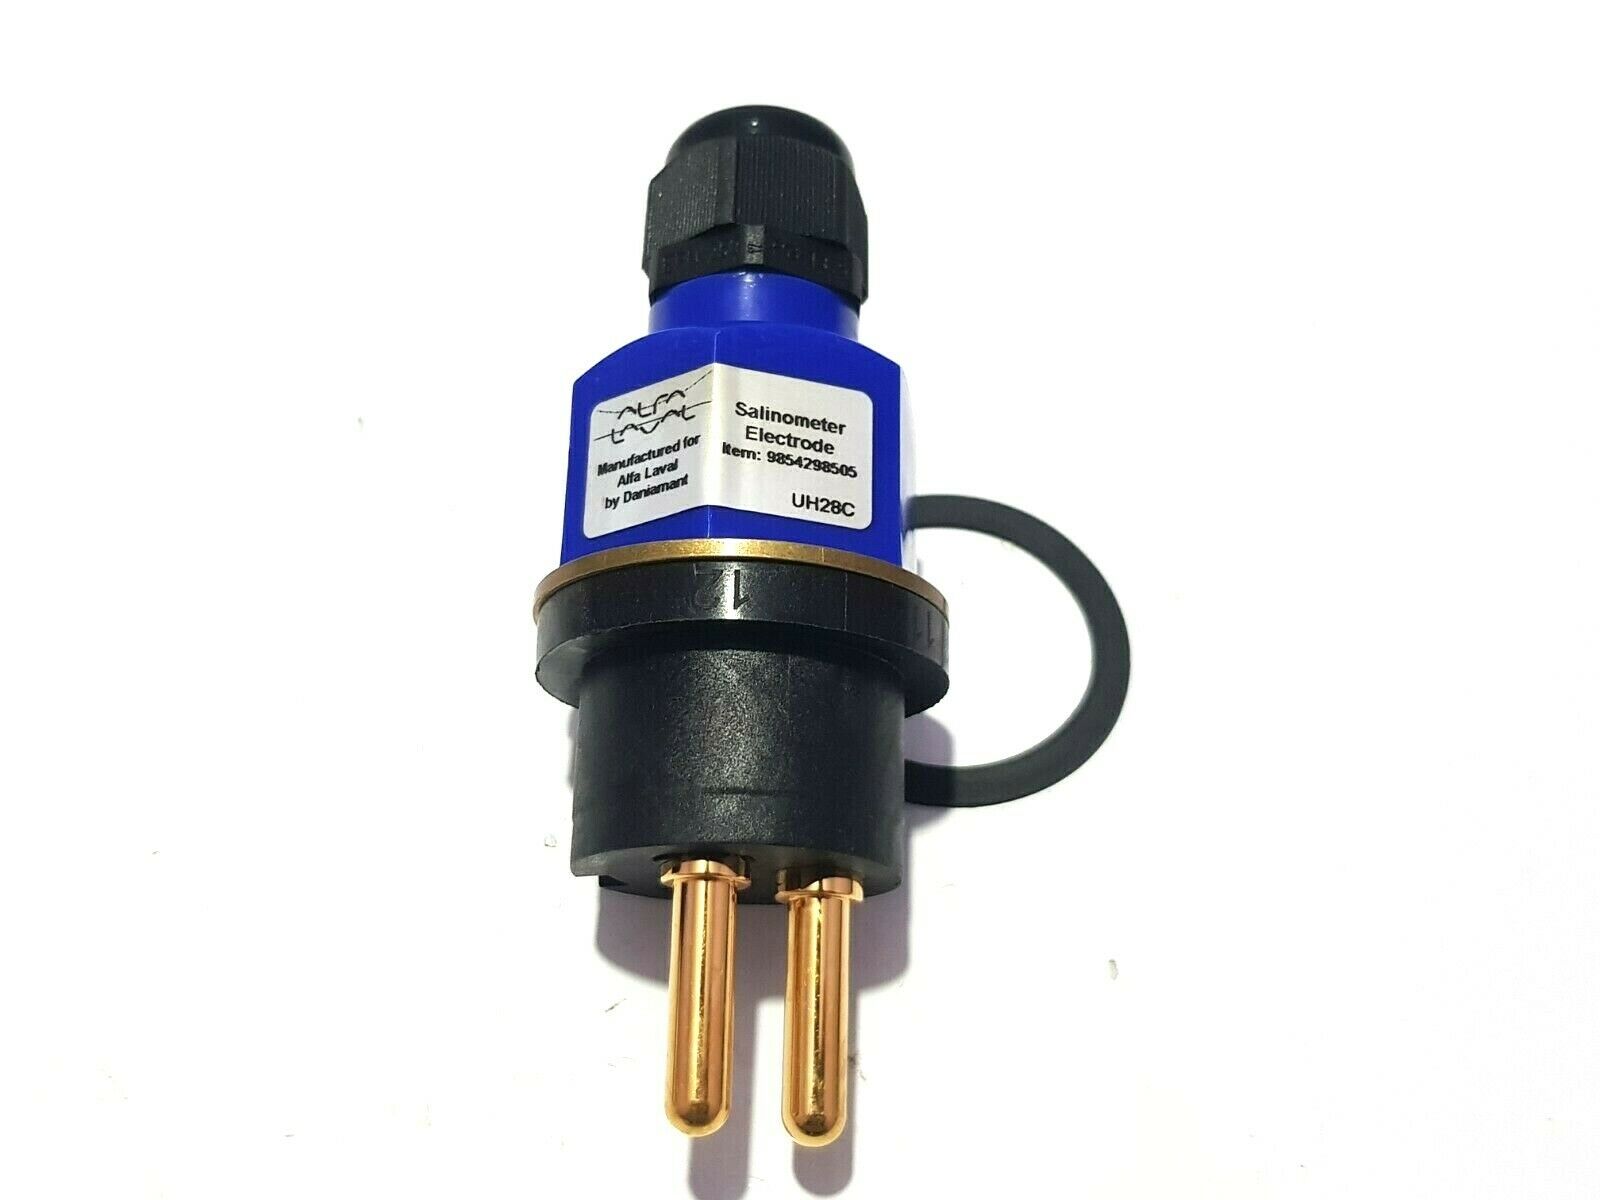 ALFA LAVAL 9854298505 ELECTRODE CELL SALINITY